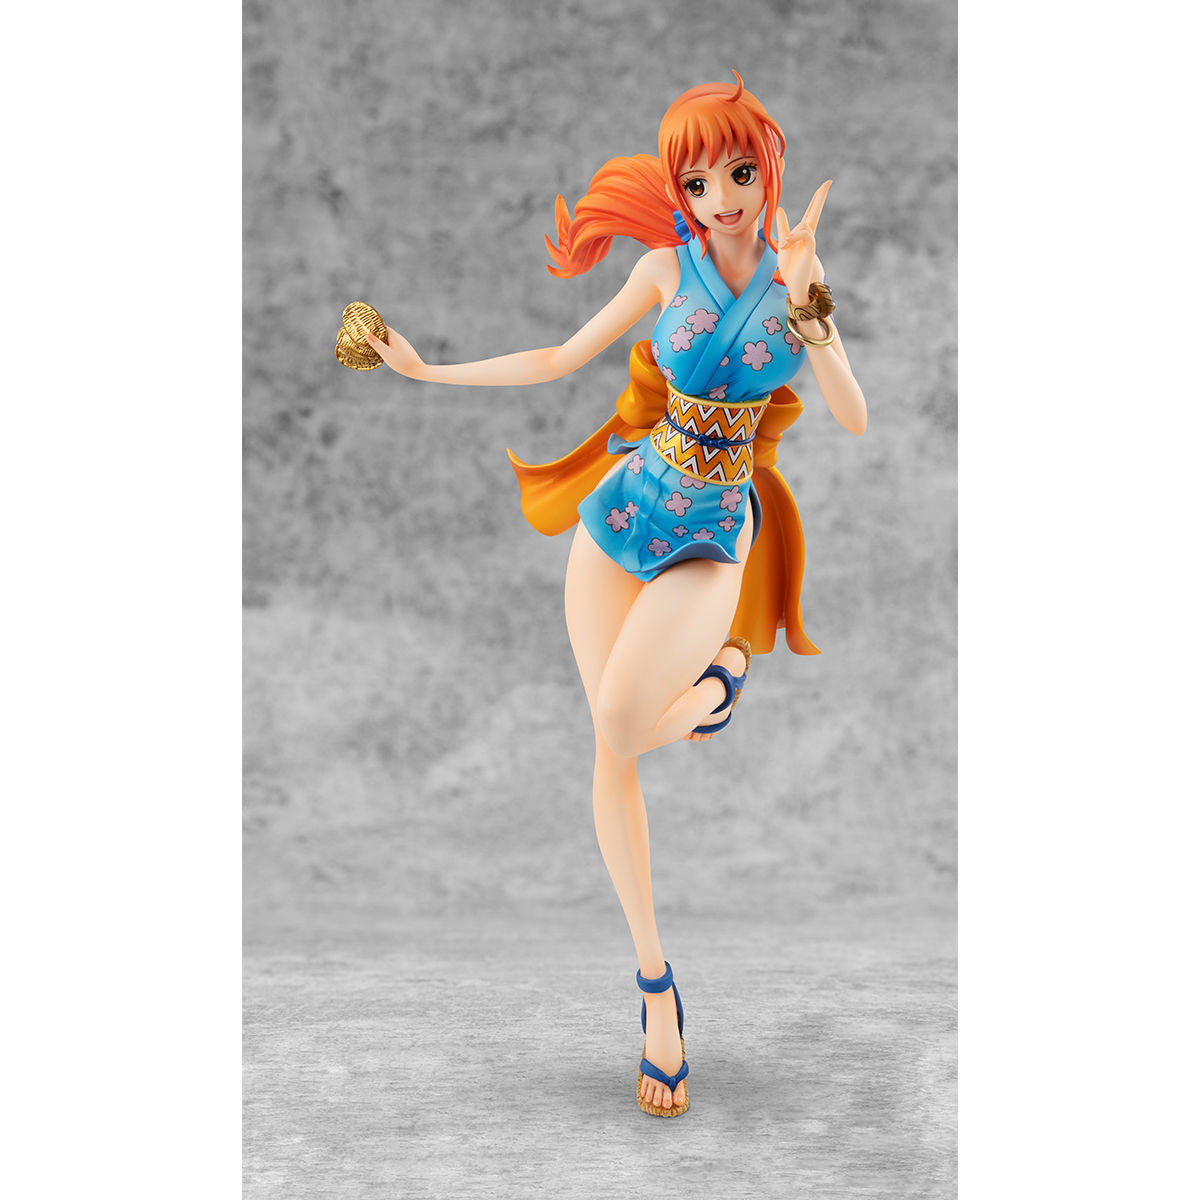 One Piece - Nami - Portrait of Pirates "Warriors Alliance" - 1/8 - O-Nami - 2023 Re-release (MegaHouse), Franchise: One Piece, Brand: MegaHouse, Release Date: 26. Dec 2022, Type: General, Store Name: Nippon Figures